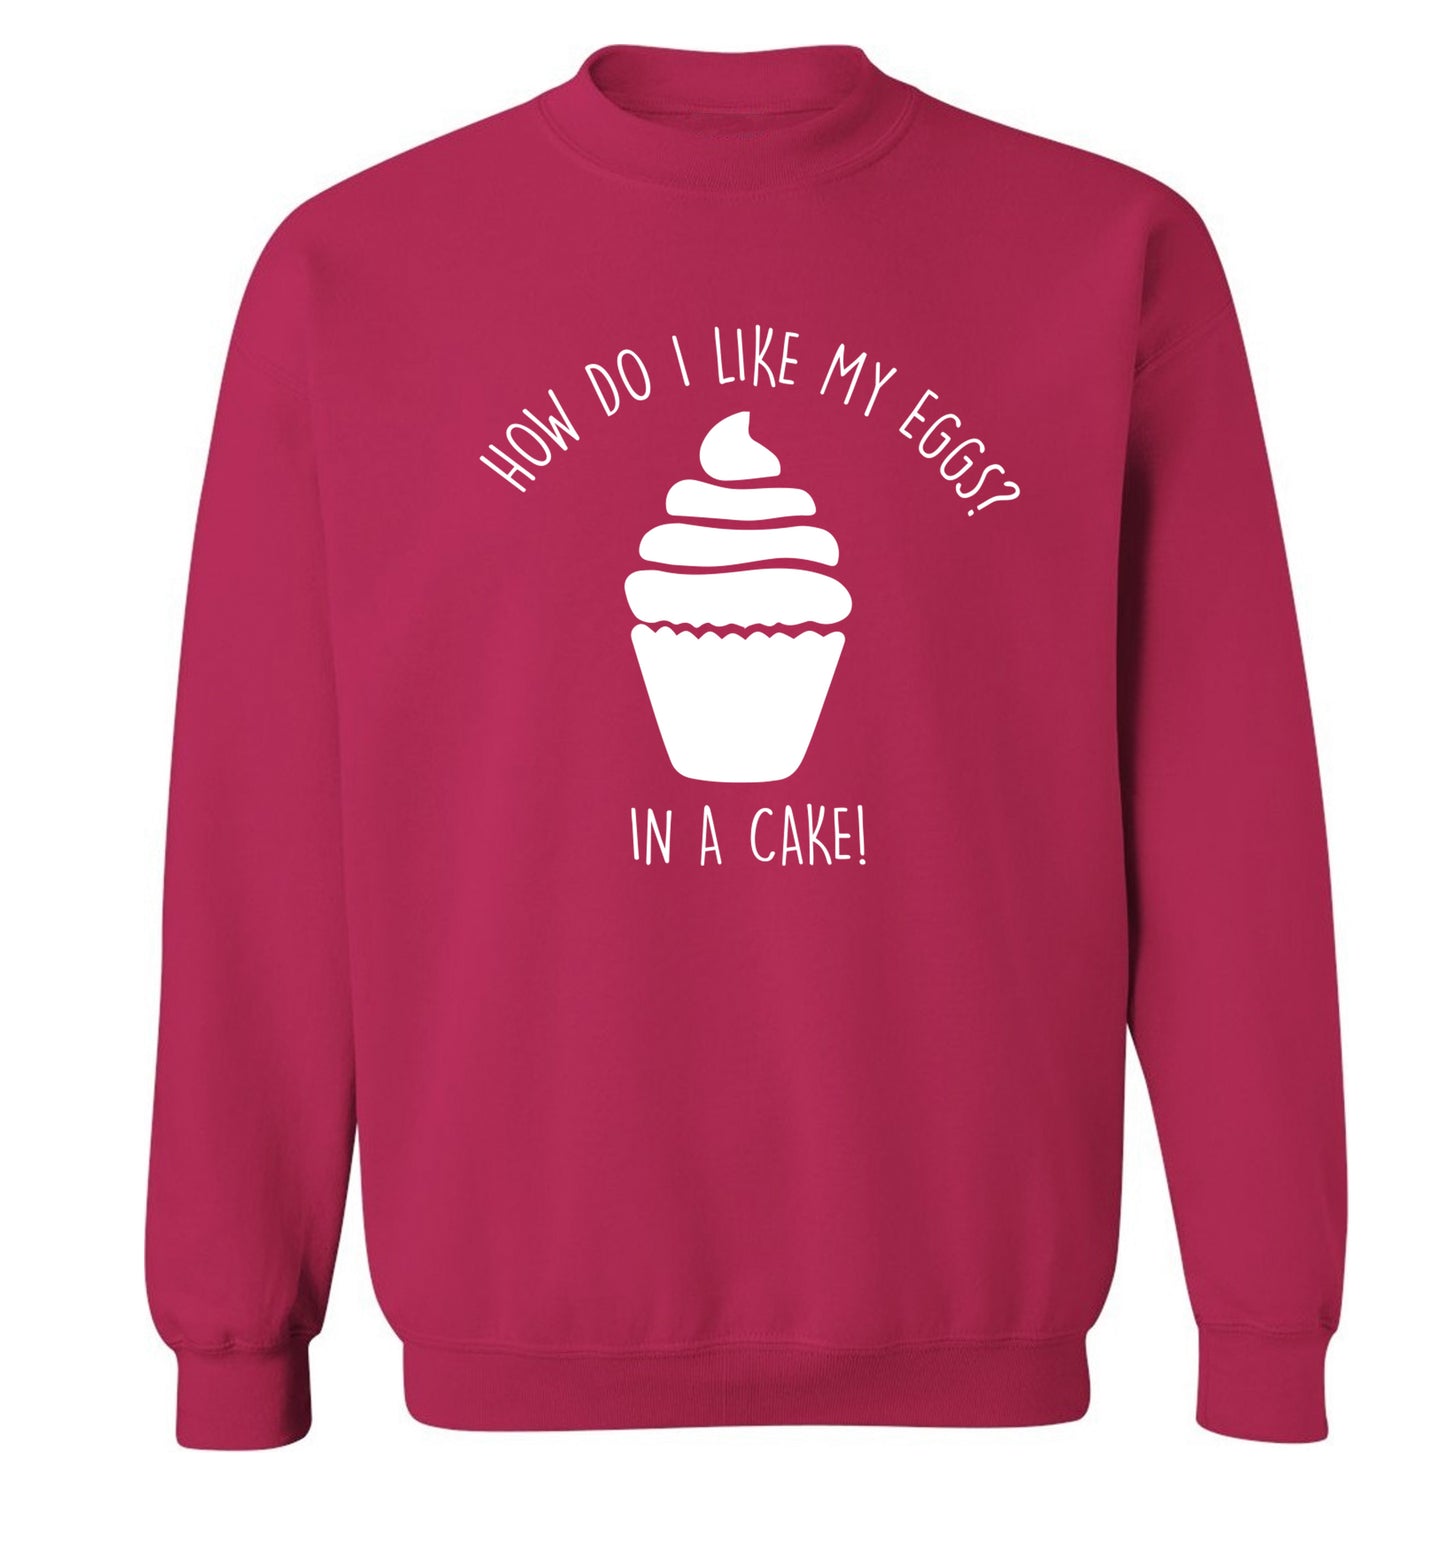 How do I like my eggs? In a cake! Adult's unisex pink Sweater 2XL